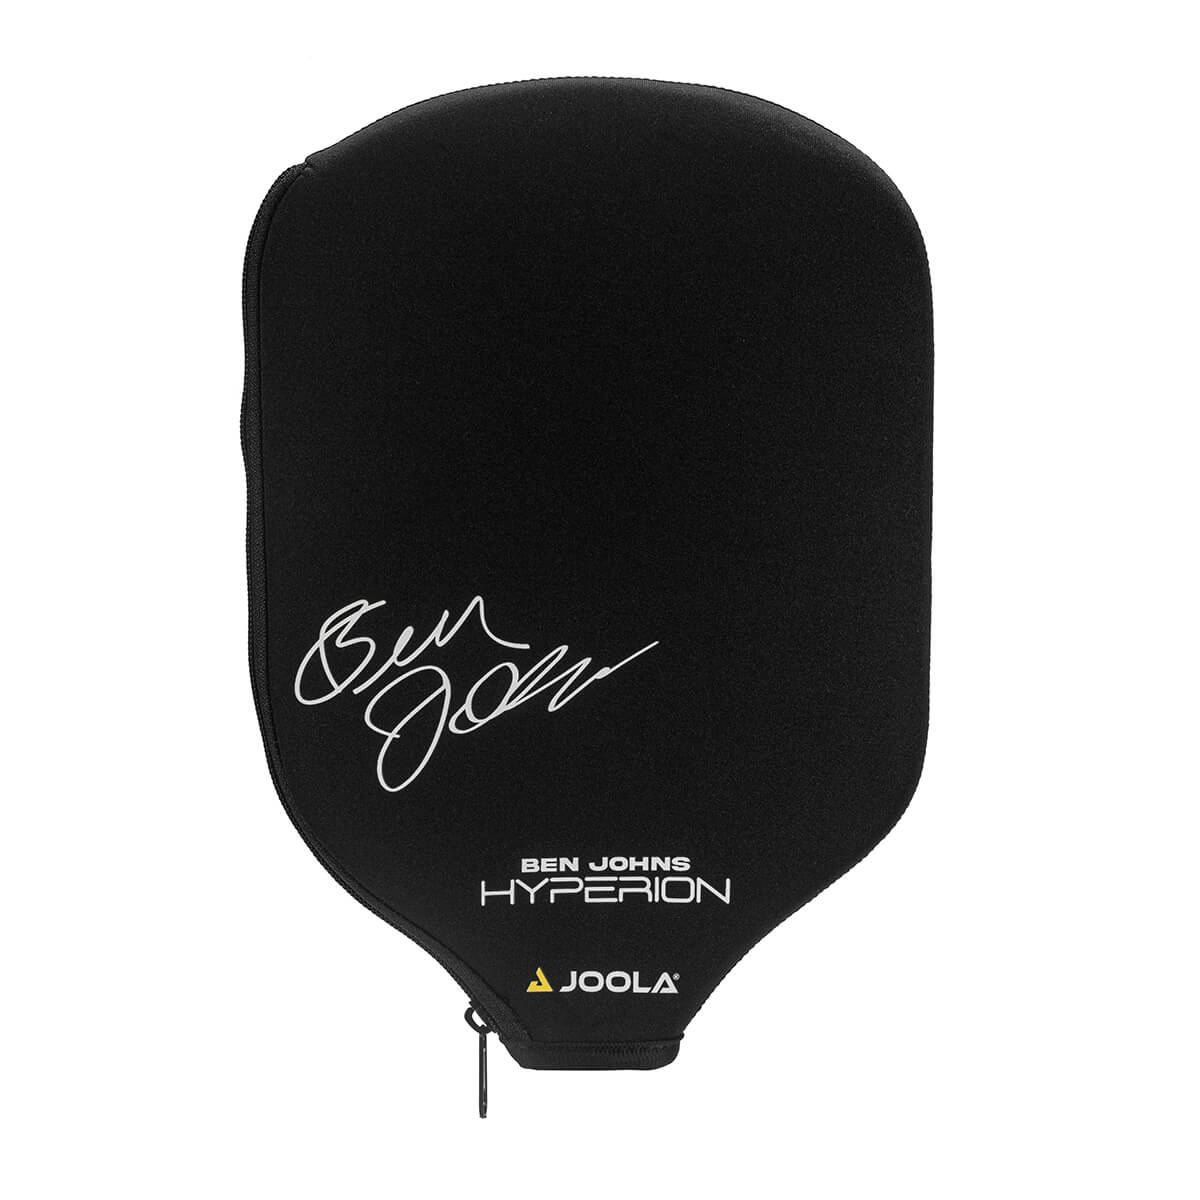 A JOOLA Elongated Neoprene Sleeve Pickleball Paddle Cover with a signature on it.